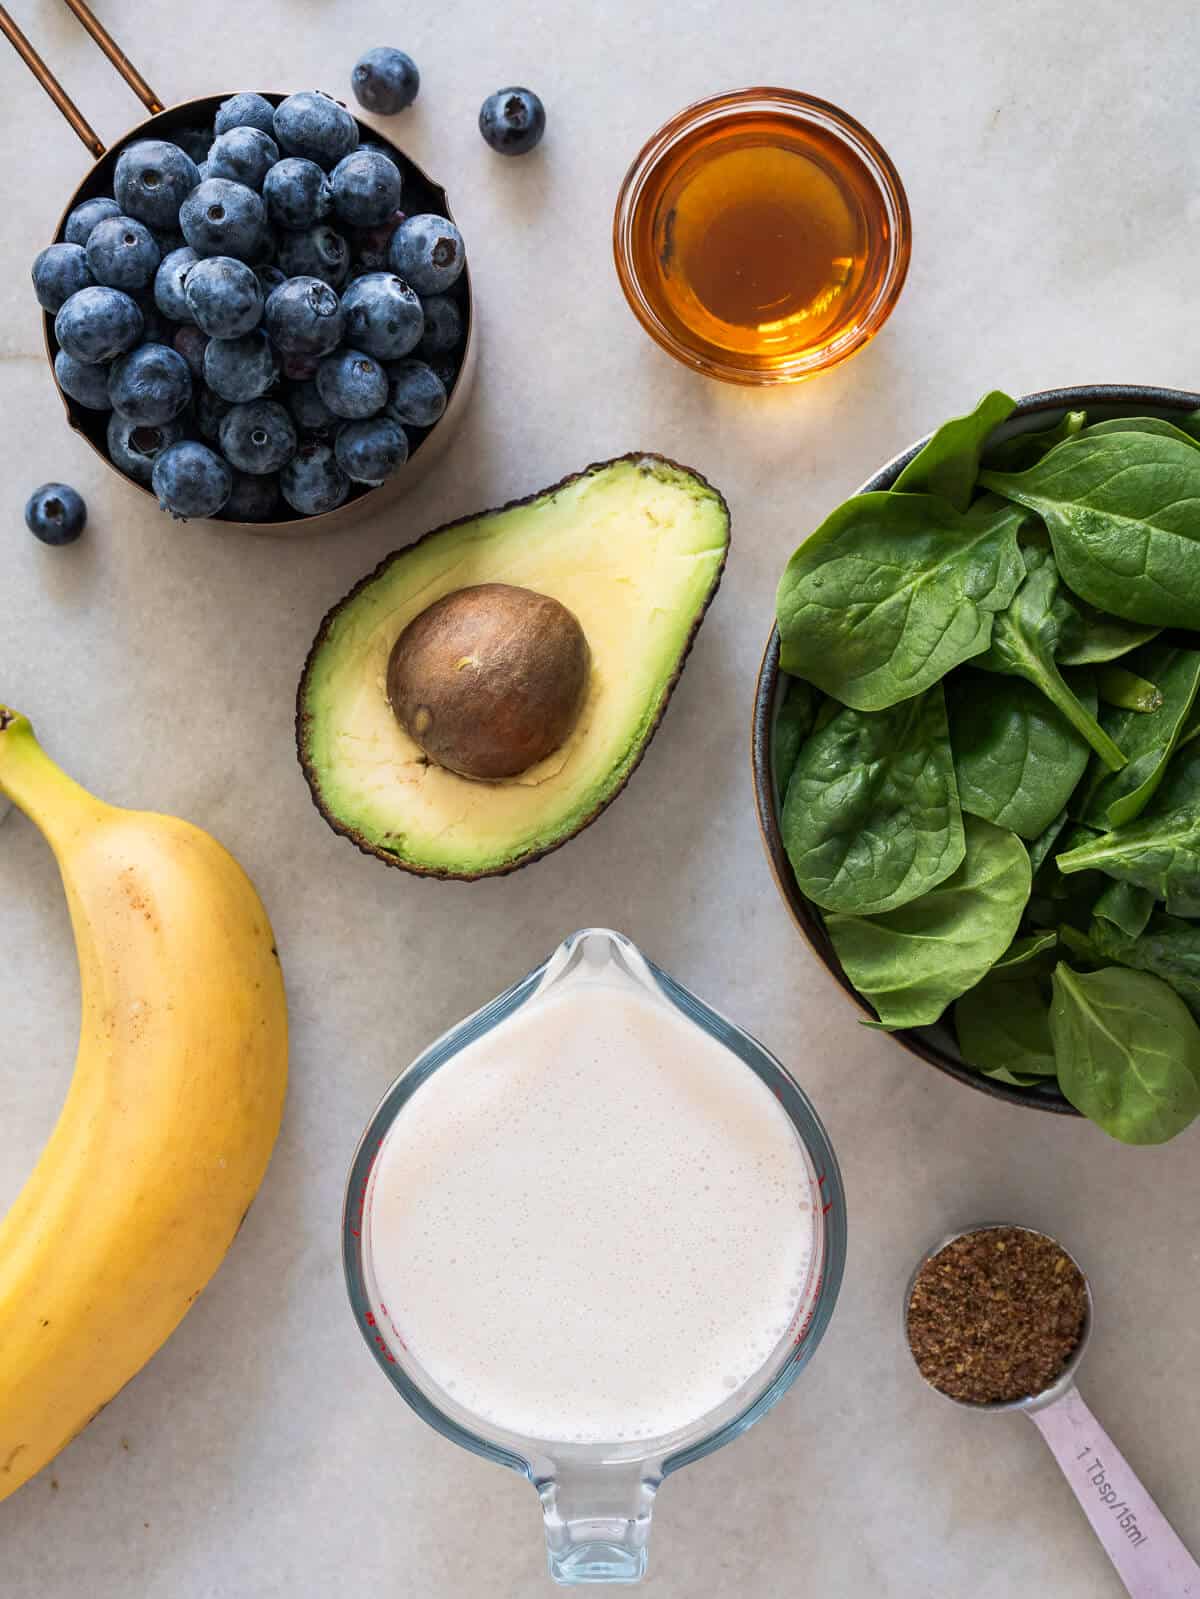 ingredients to make an avocado blueberry smoothie with spinach and banana.